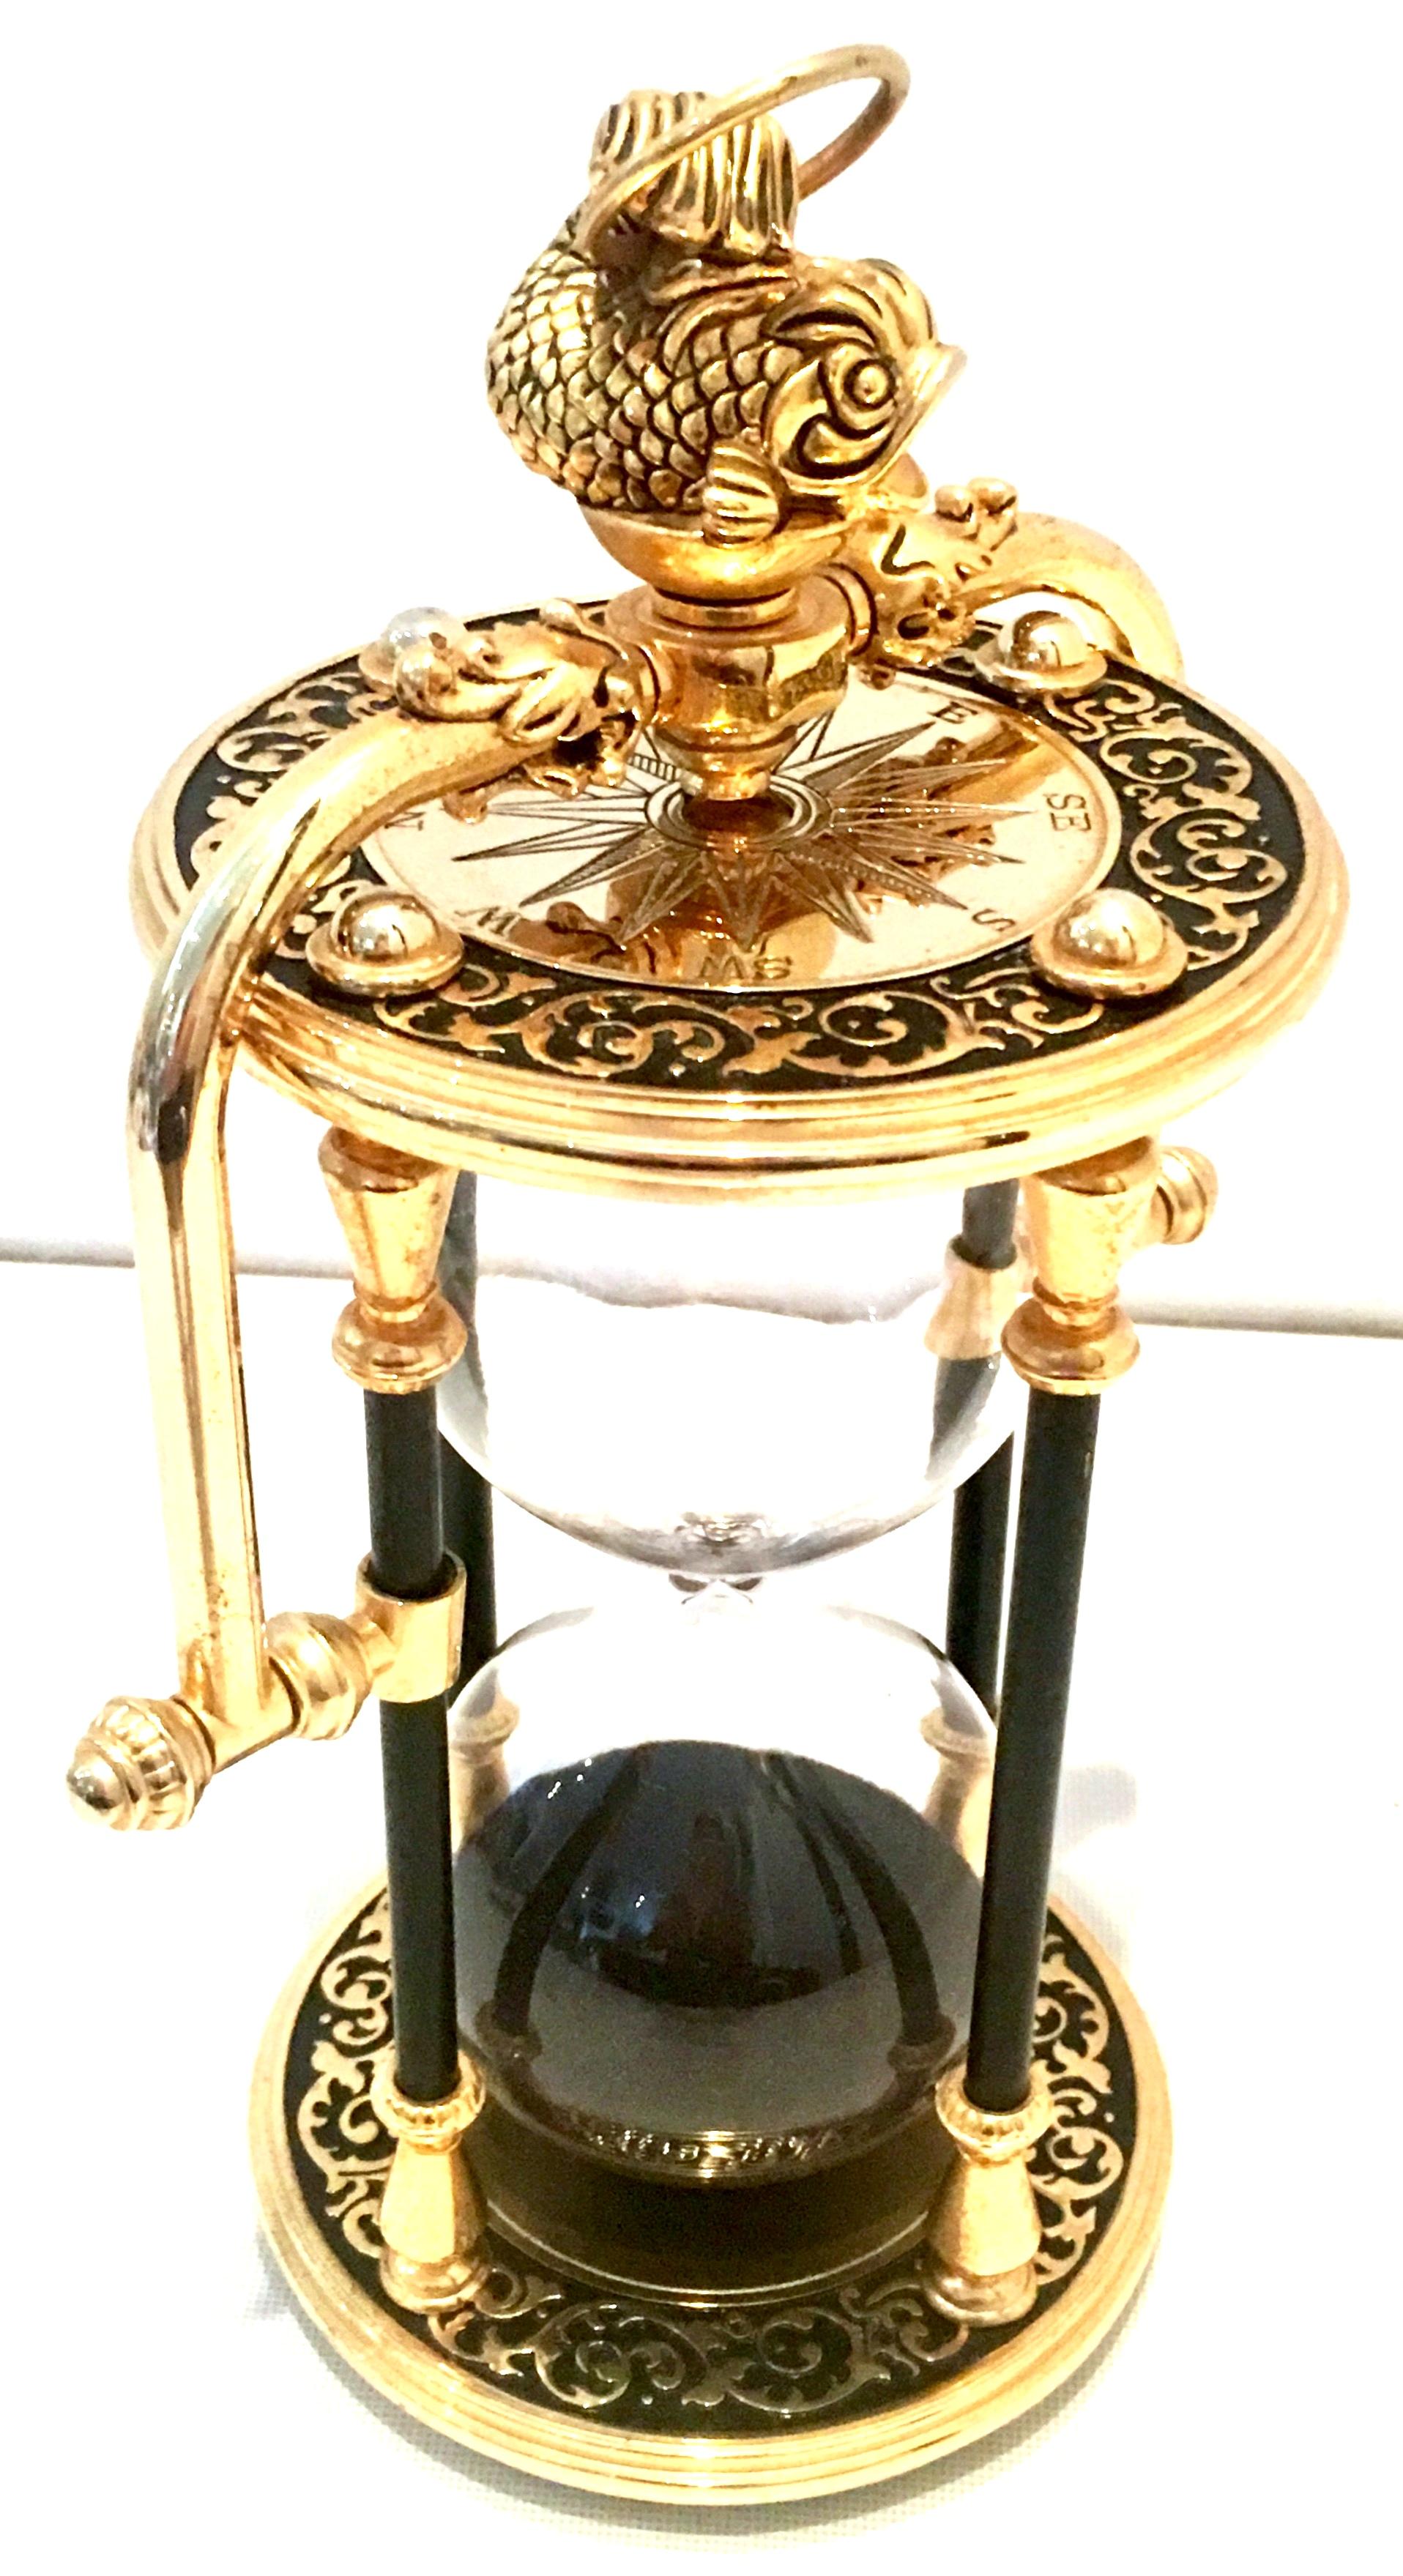 21st century gilt gold brass, black enamel & blown glass hanging hour glass. Features, black sand, a Koi fish detail where the loop hook is for hanging, raised gold over black enamel scroll motif and each end has an etched decorative compass.
Can